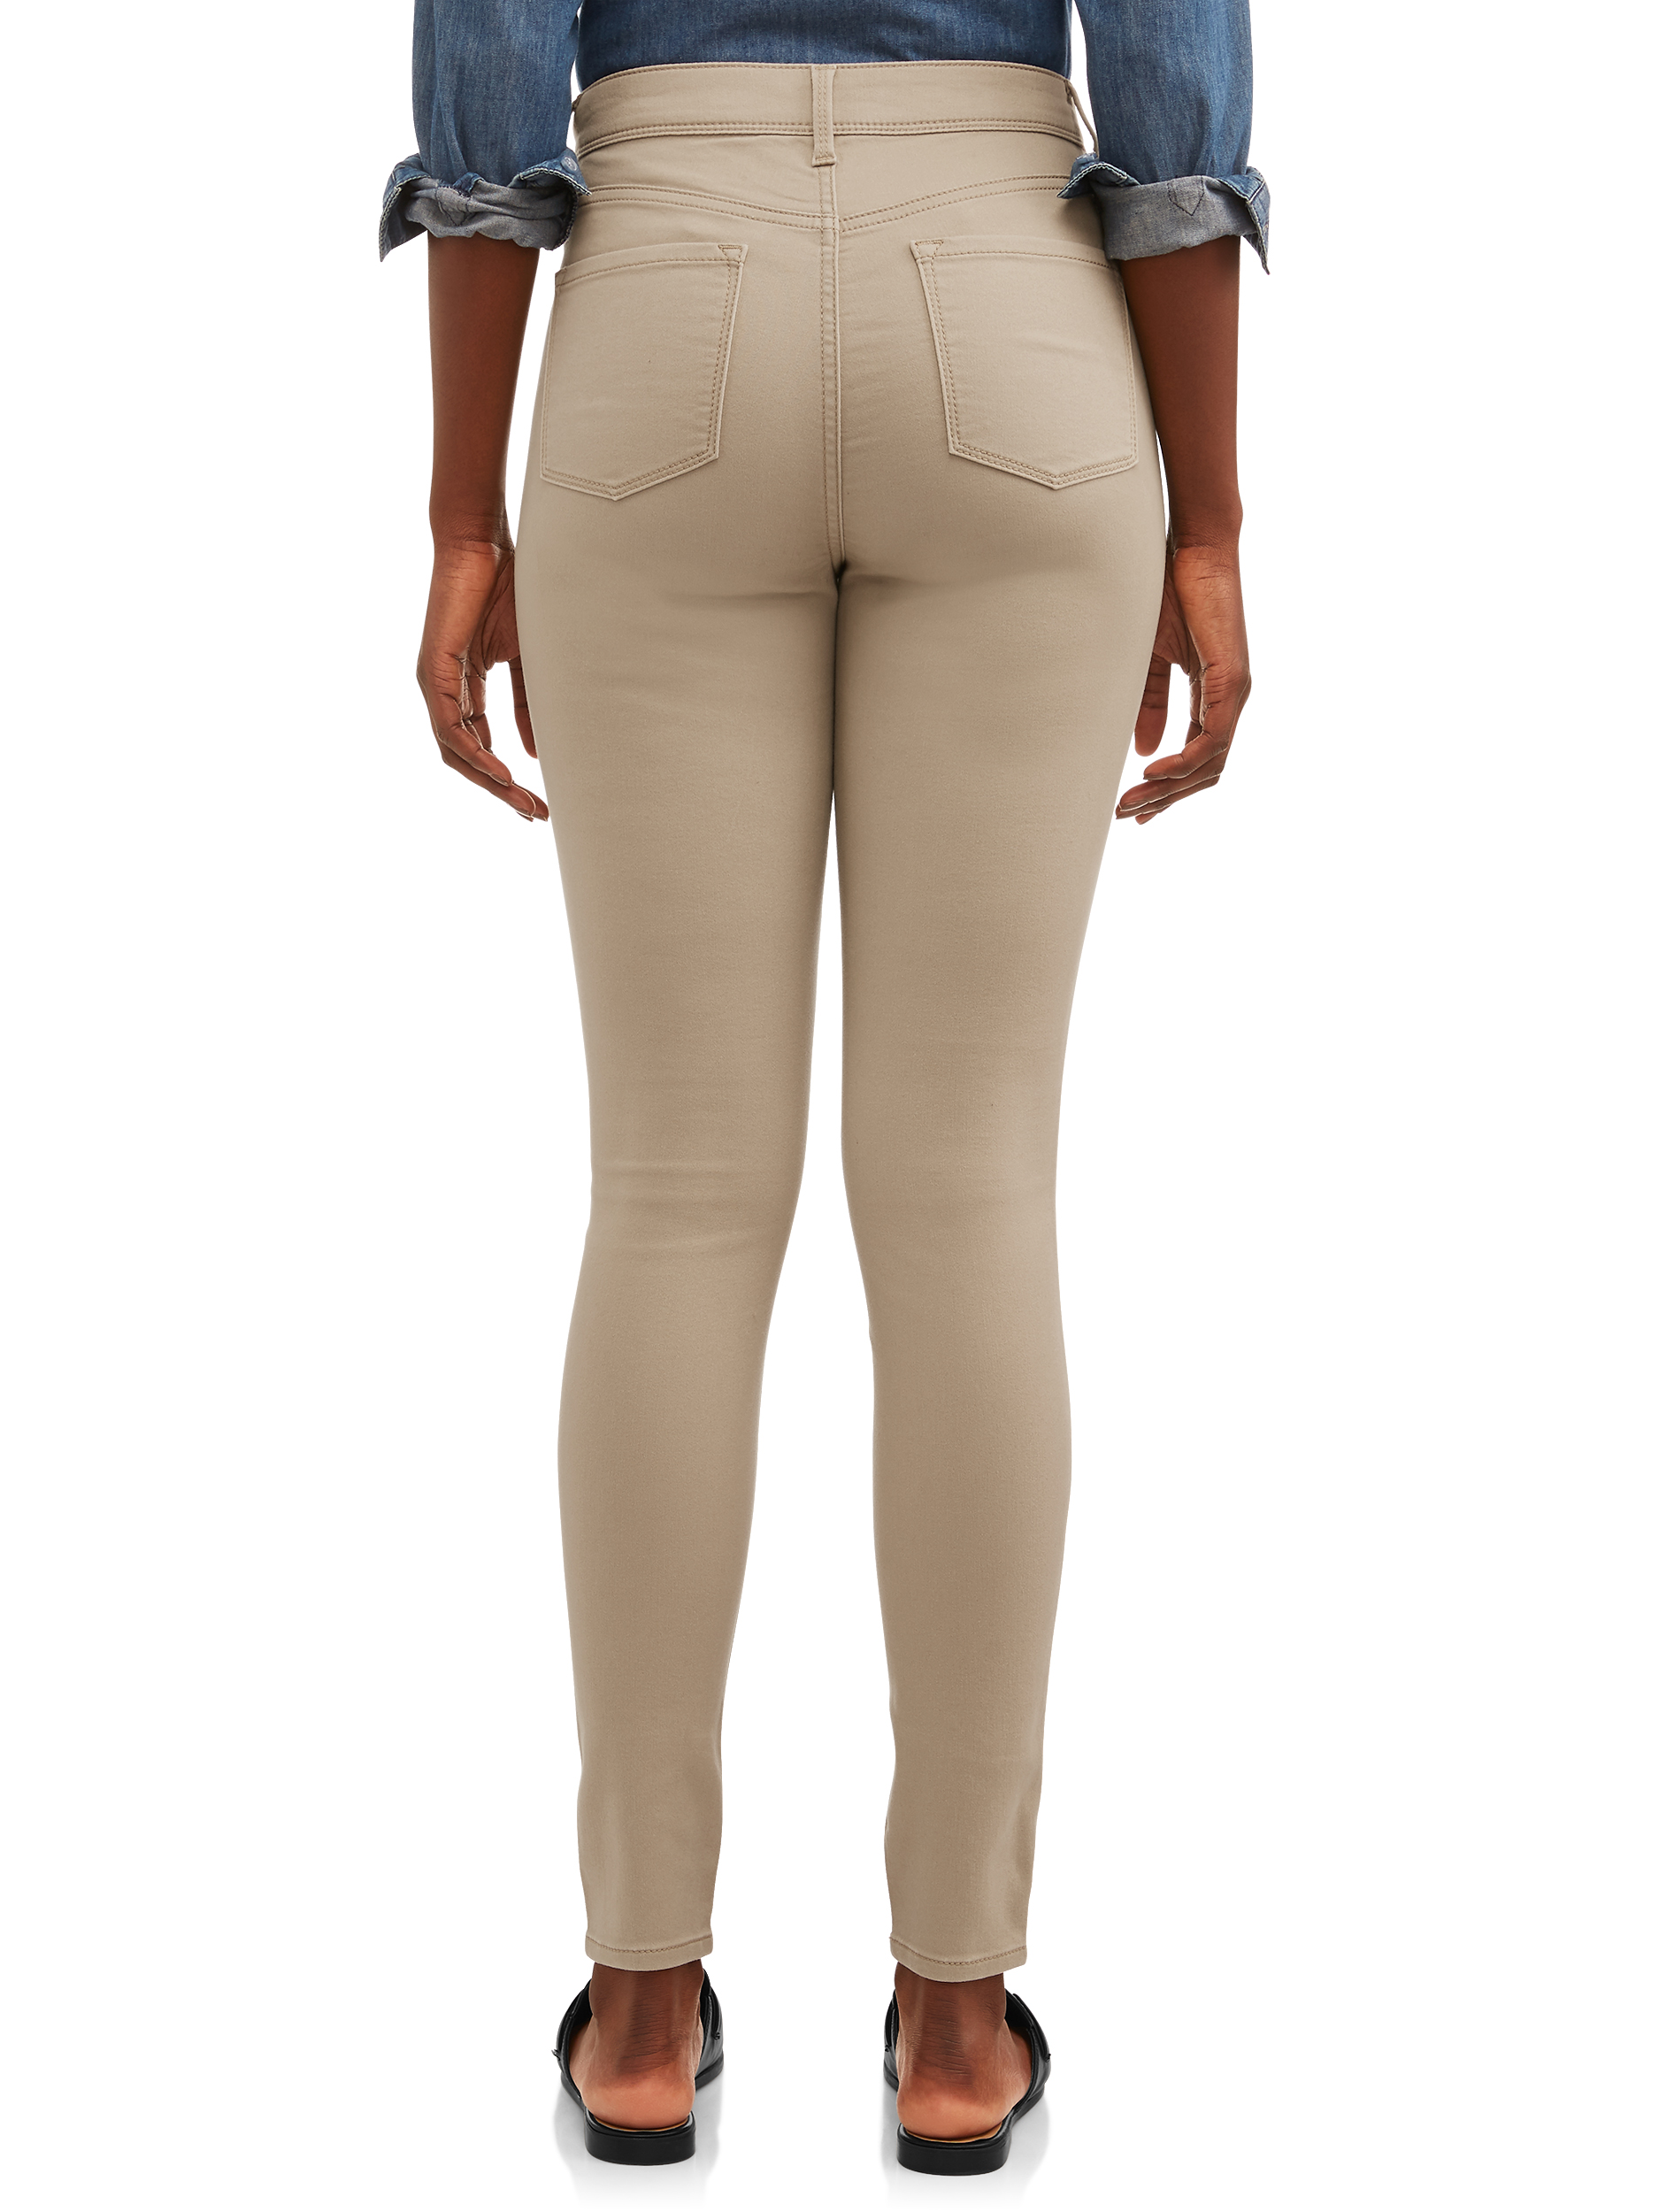 Time and Tru Women's High Rise Sculpted Jeggings - image 2 of 4